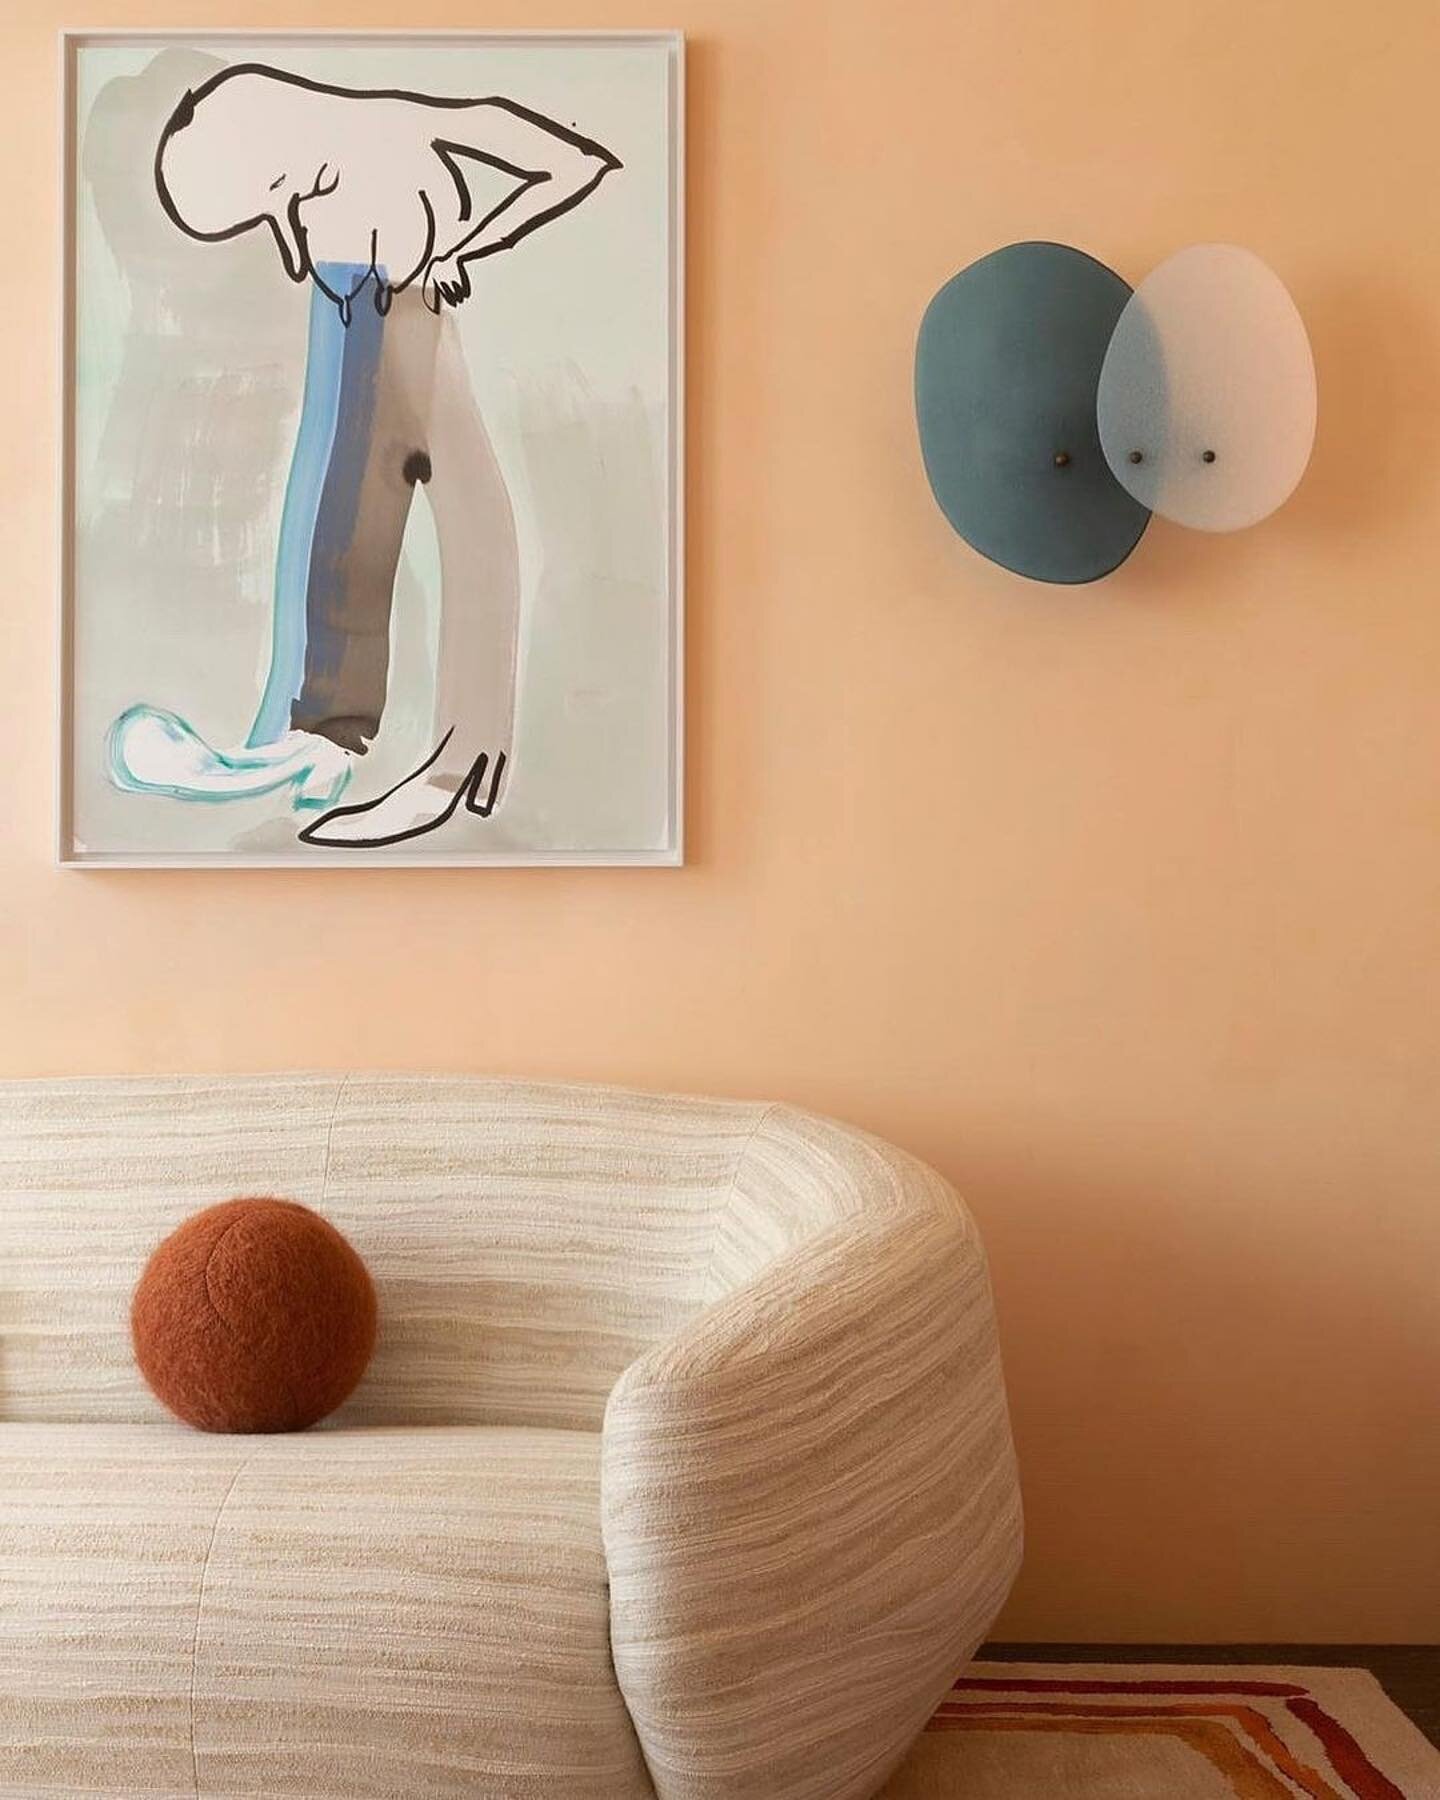 HAPPY SATURDAY! ◾️Asymmetry sofa, Ball Cushion and the Honeymoon Sconce in #Paris. ⁠ Design: @pierre.yovanovitch via: @theinvisiblecollection 
⁠
Discover more on #TheInvisibleCollection ⁠
⁠
Photo: @jpvaillancourtimages ⁠
⁠